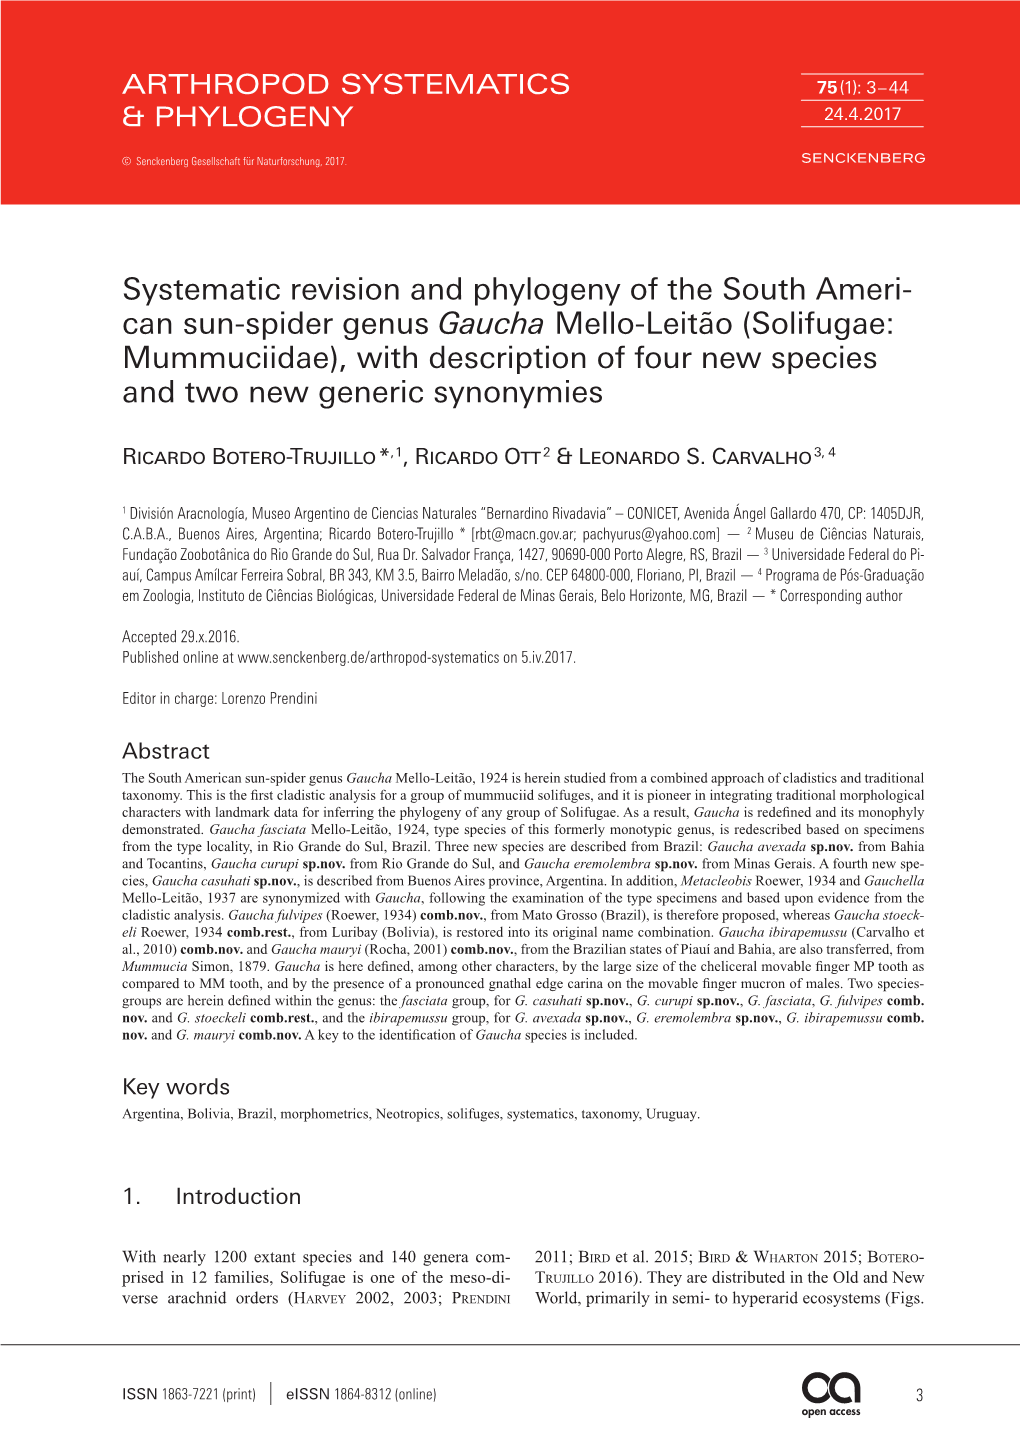 Systematic Revision and Phylogeny of the South American Sun-Spider